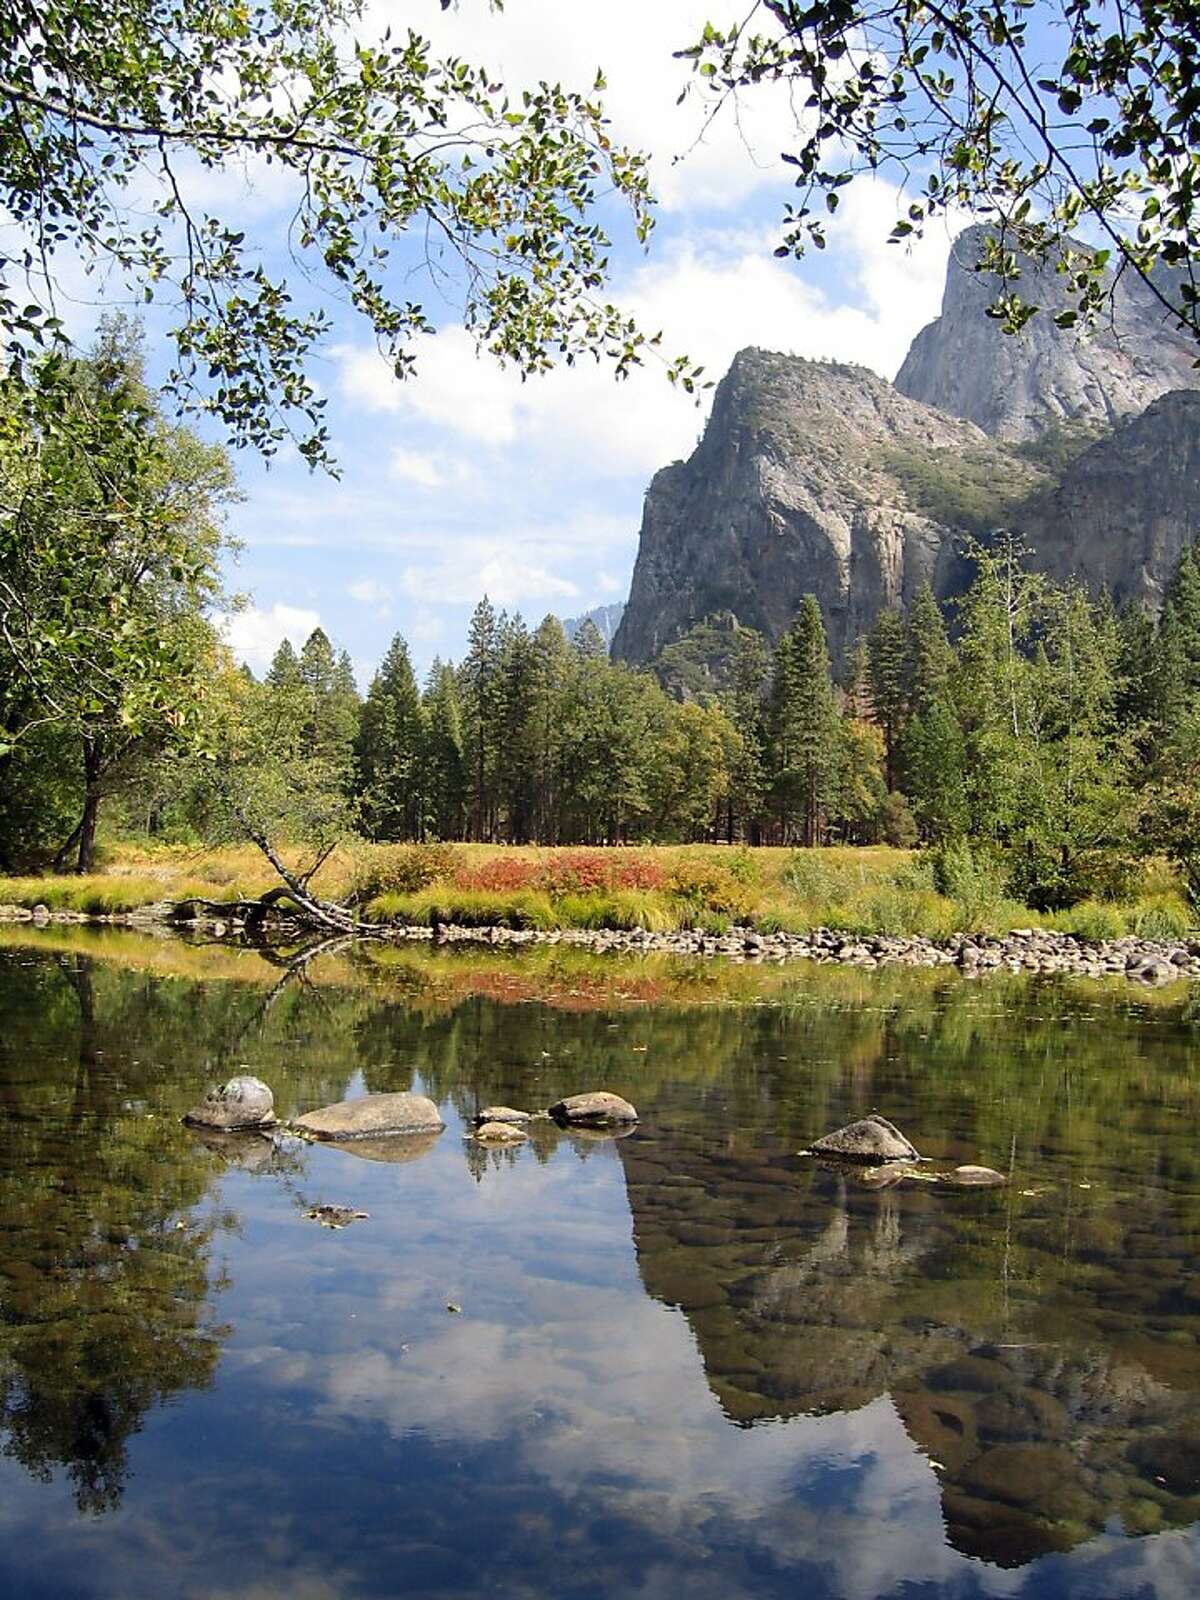 A file photo of the Merced River in California's Yosemite National Park.